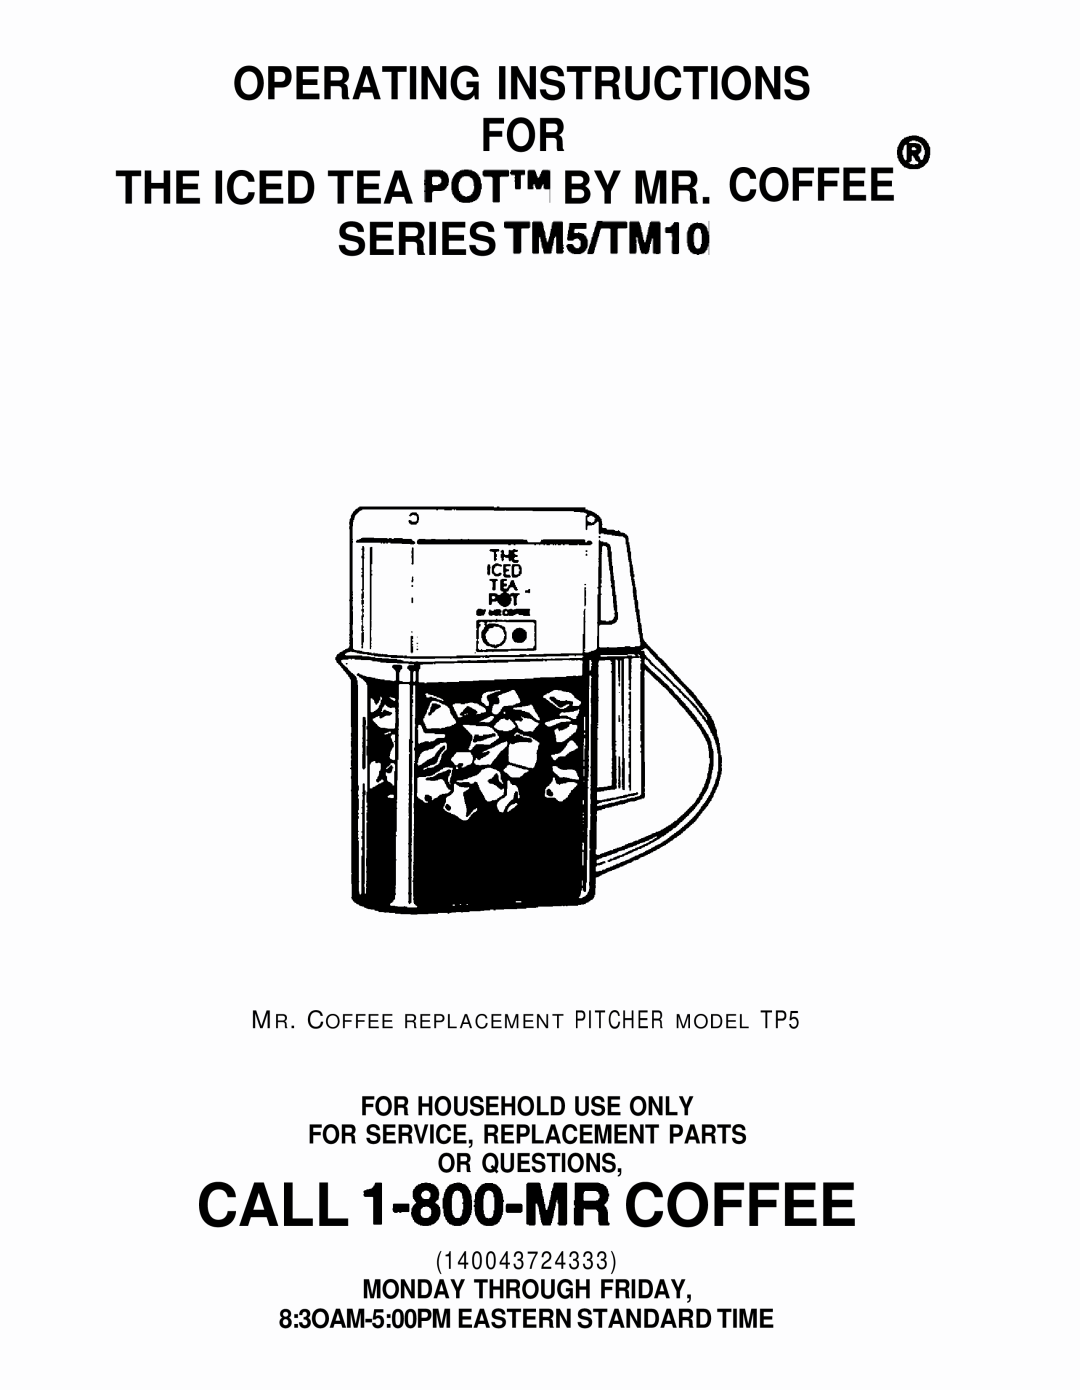 Mr. Coffee TM5 operating instructions For Household Use Only For Service, Replacement Parts Or Questions, SERIES TMWTMlO 